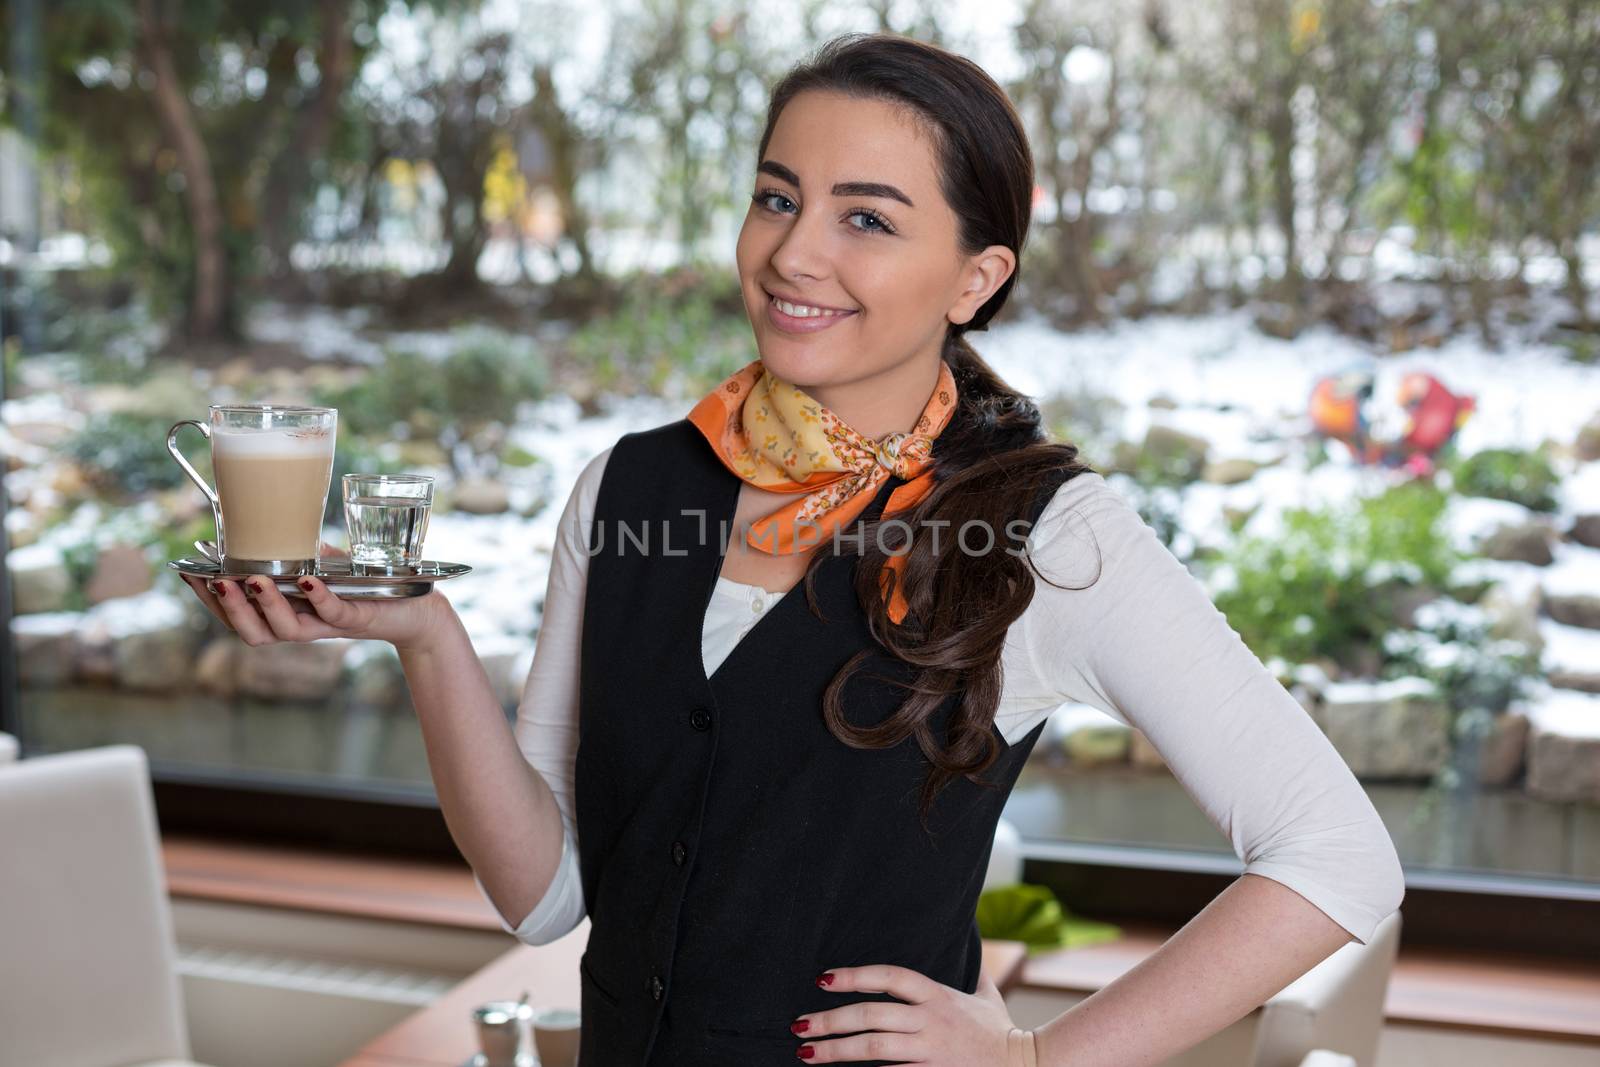 Waitress or server posing with cup of coffee in cafe or restaurant